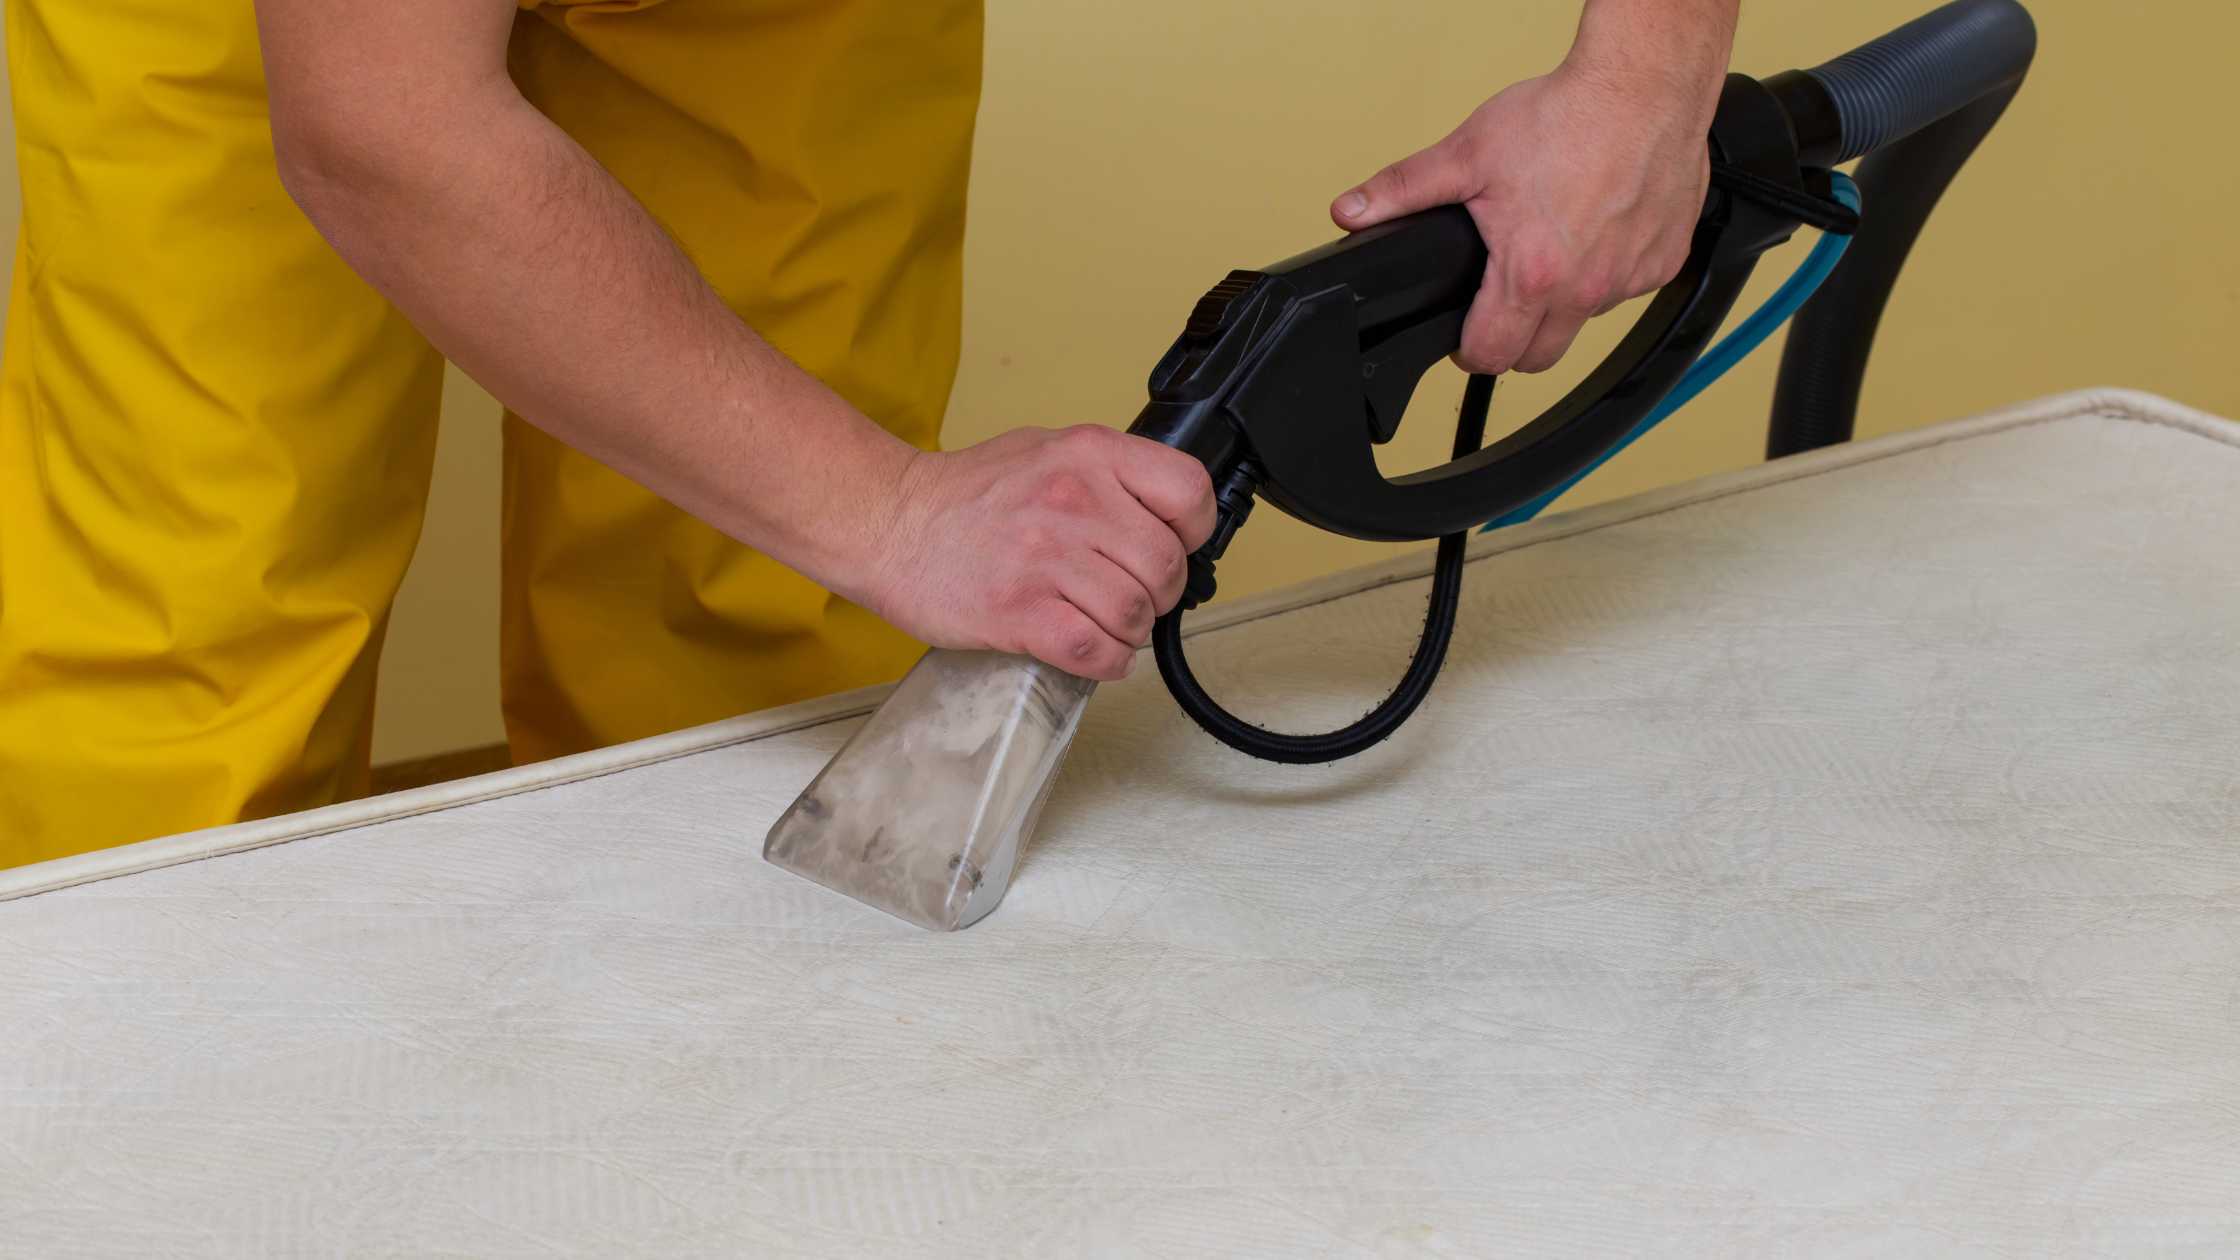 What is the Best Way to Keep Your Mattresses Spotless in Dubai?1. How to Effortlessly Achieve a Spotless Mattress with Dubai's Expert Cleaning Services